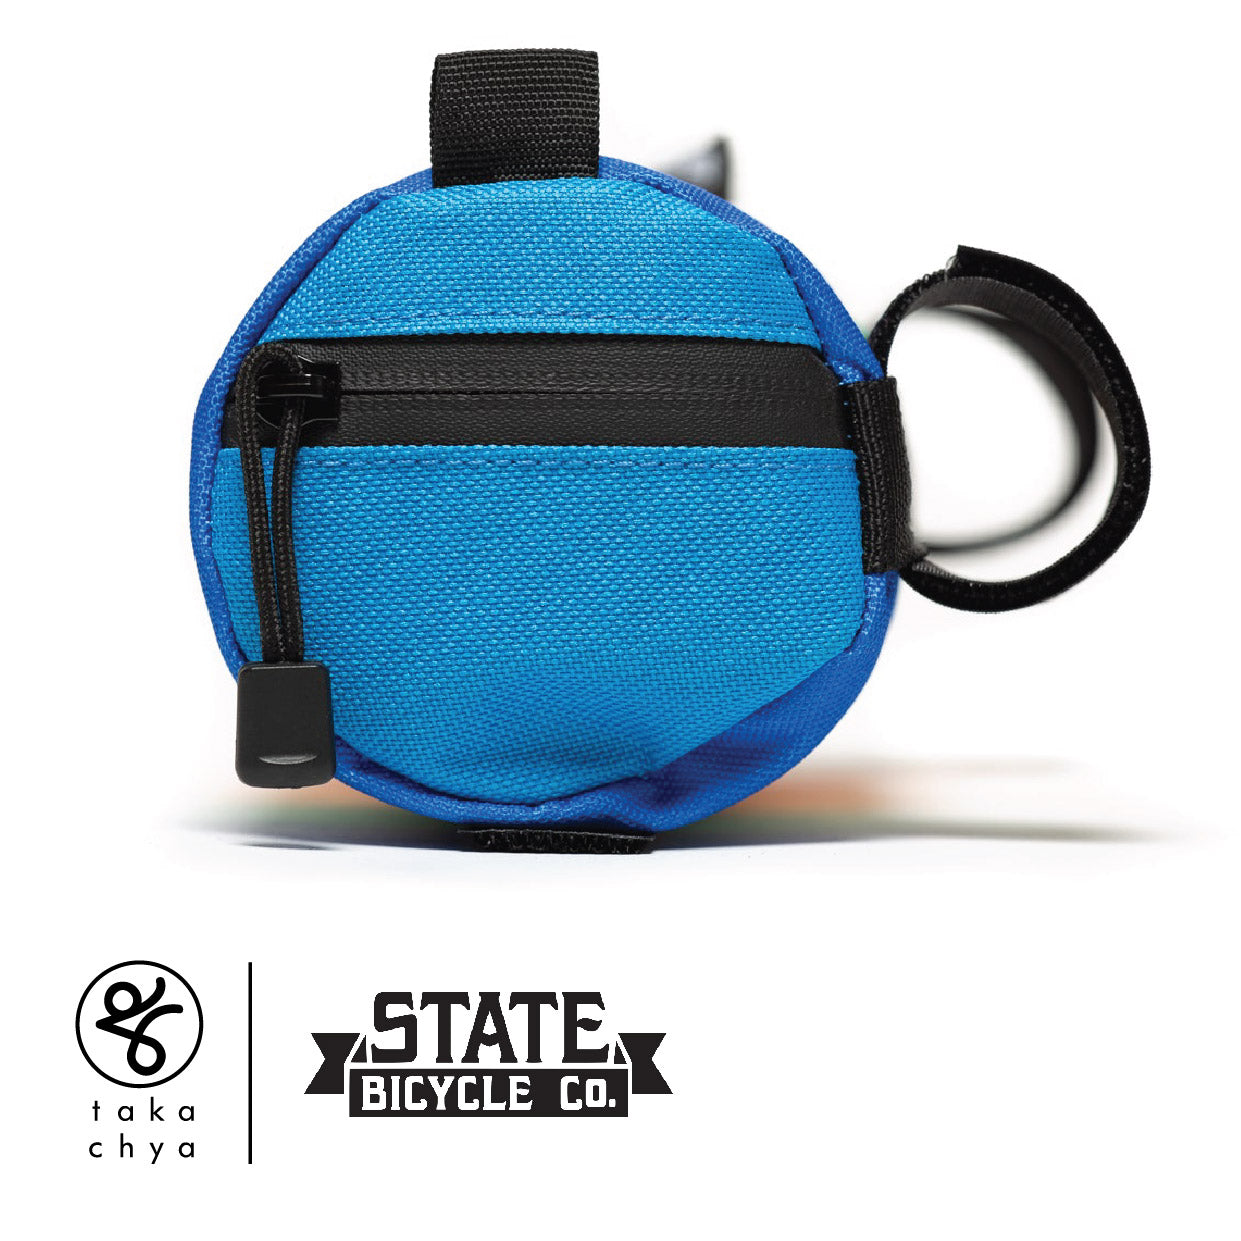 STATE BICYCLE CO. X NATIONAL PARK FOUNDATION - ALL-ROAD HANDLEBAR BAG - YELLOWSTONE